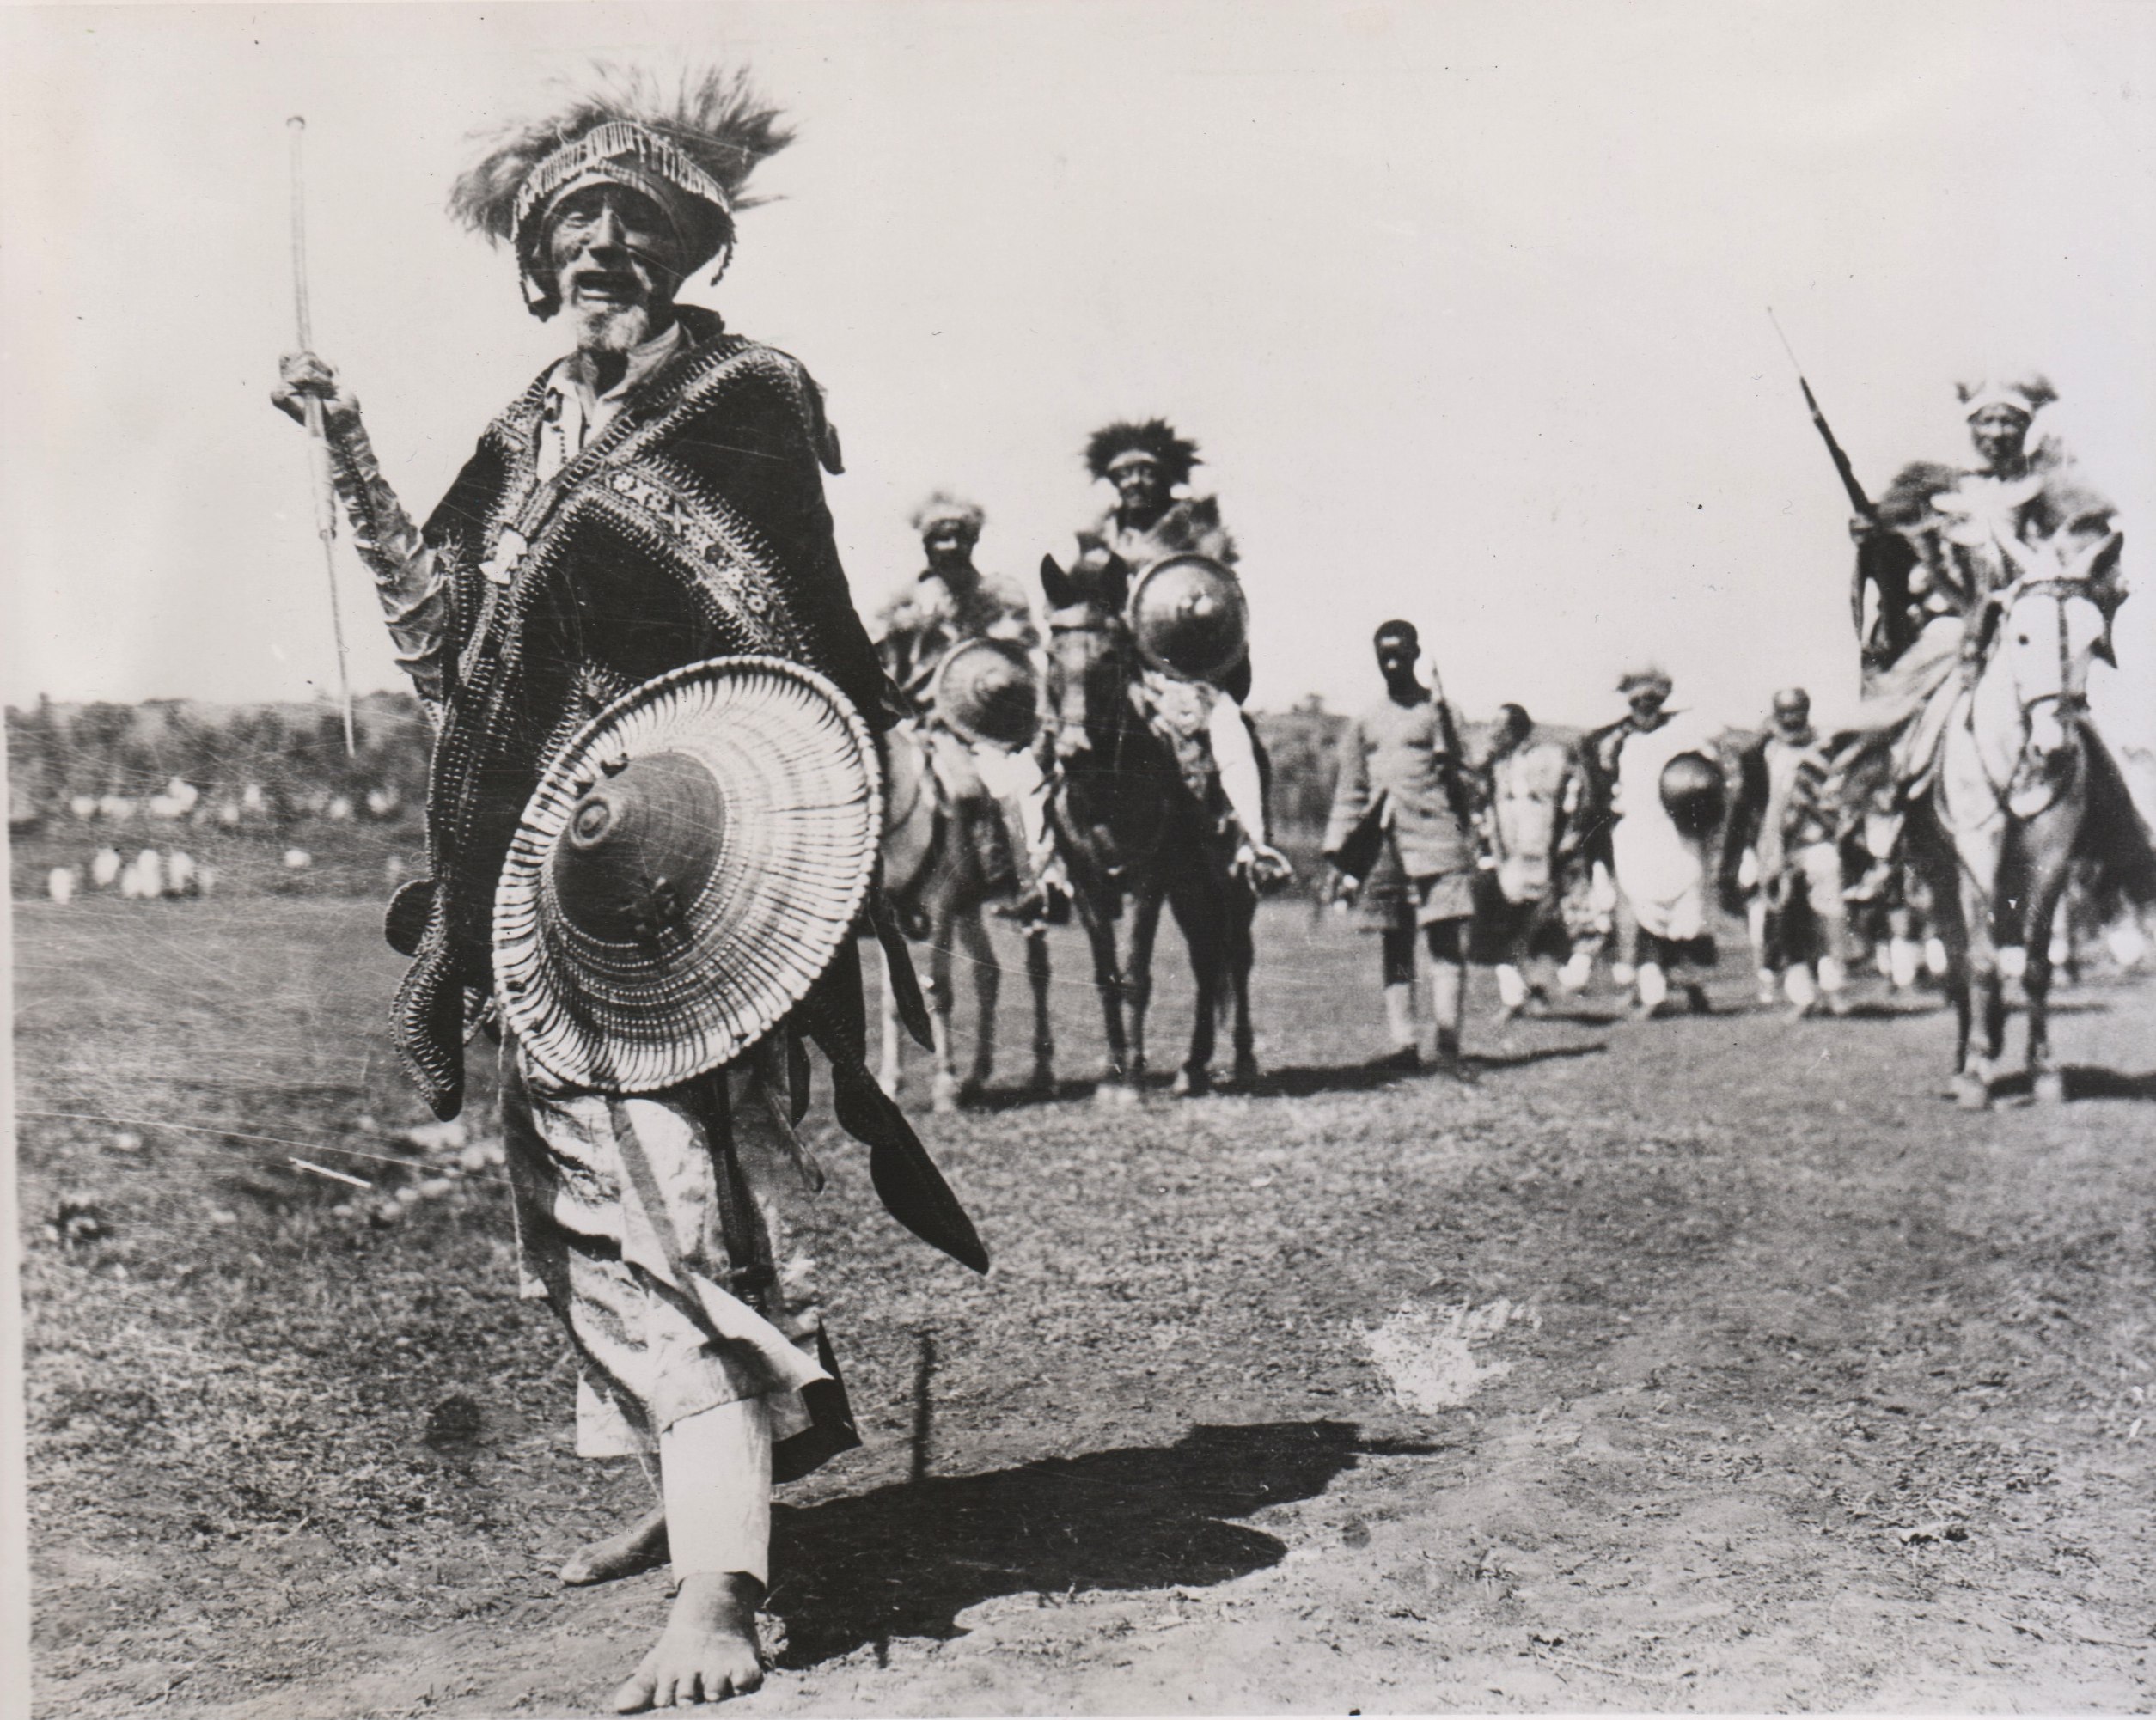 Ethiopian war chiefs do their battle dance as they march to combat the Italian invasion of Ethiopia in 1935. They did have guns though, not spears, and was said to maybe have some 80,000 soldiers, but were handily defeated by the Italians who had better weapons and armored vehicles. The Italians would conquer Ethiopia decisively a year after invading, and annex them to their control. The Italians were ruthless. They killed upwards of 7% of the Ethiopia's entire population during the brief war, as many as 800,000 people. The stayed oppressive, often mutilating men with castration and other nefarious acts during occupation right up through WWII before the final remnants of Italian forces were rooted out in 1943.